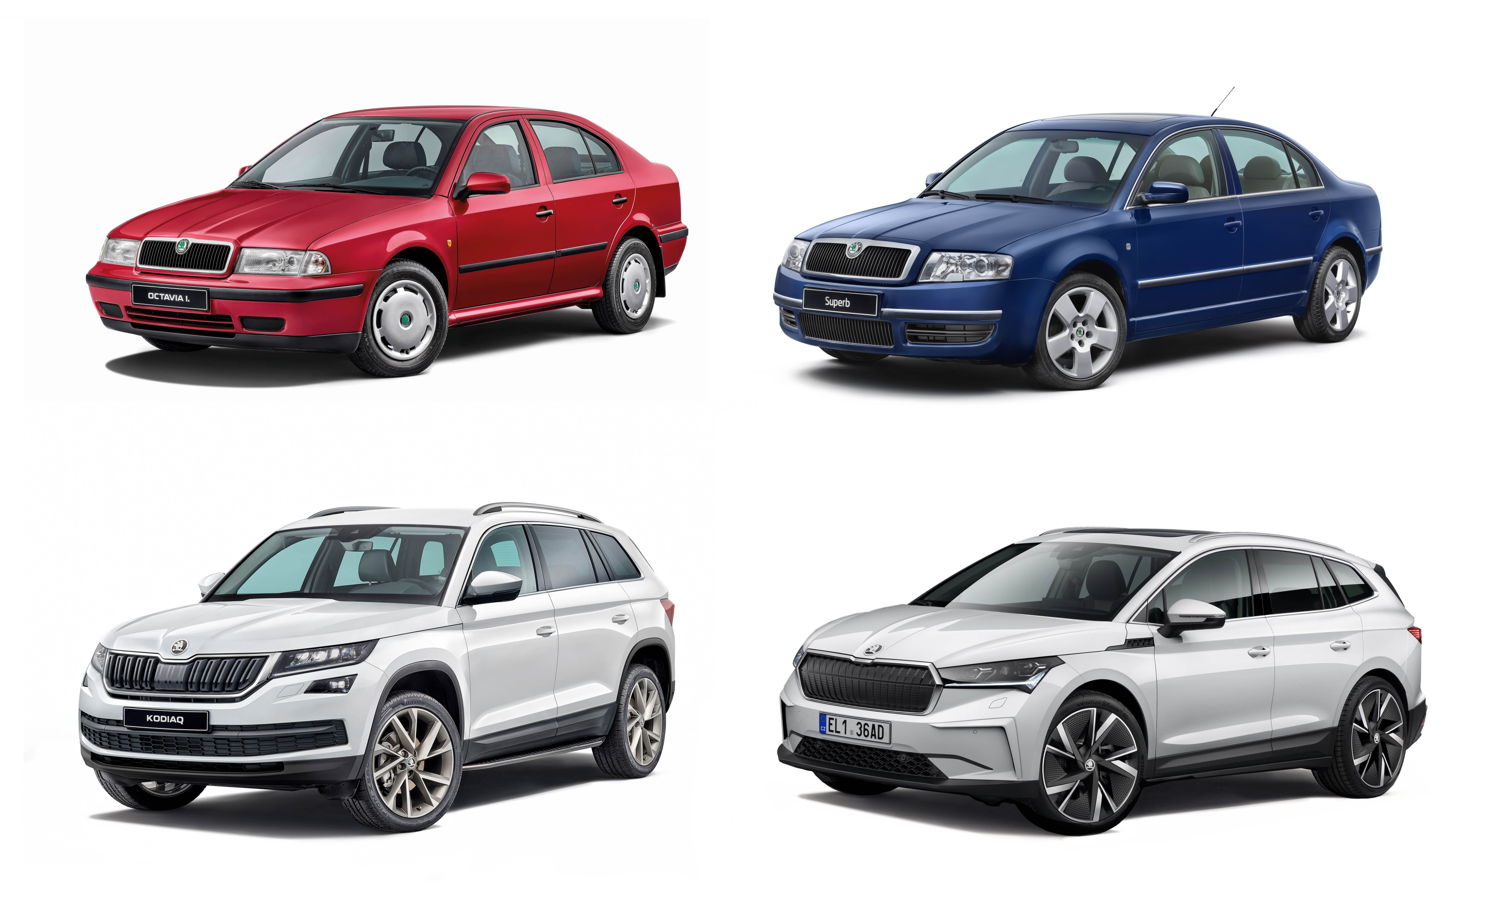 Milestones in product development: the OCTAVIA was the first ŠKODA model to be built on a VW platform in 1996, the SUPERB marked the return of the brand's flagship in 2001 and the ENYAQ iV debuted in 2020 as the first ŠKODA model built on the Modular Electrification Toolkit (MEB).